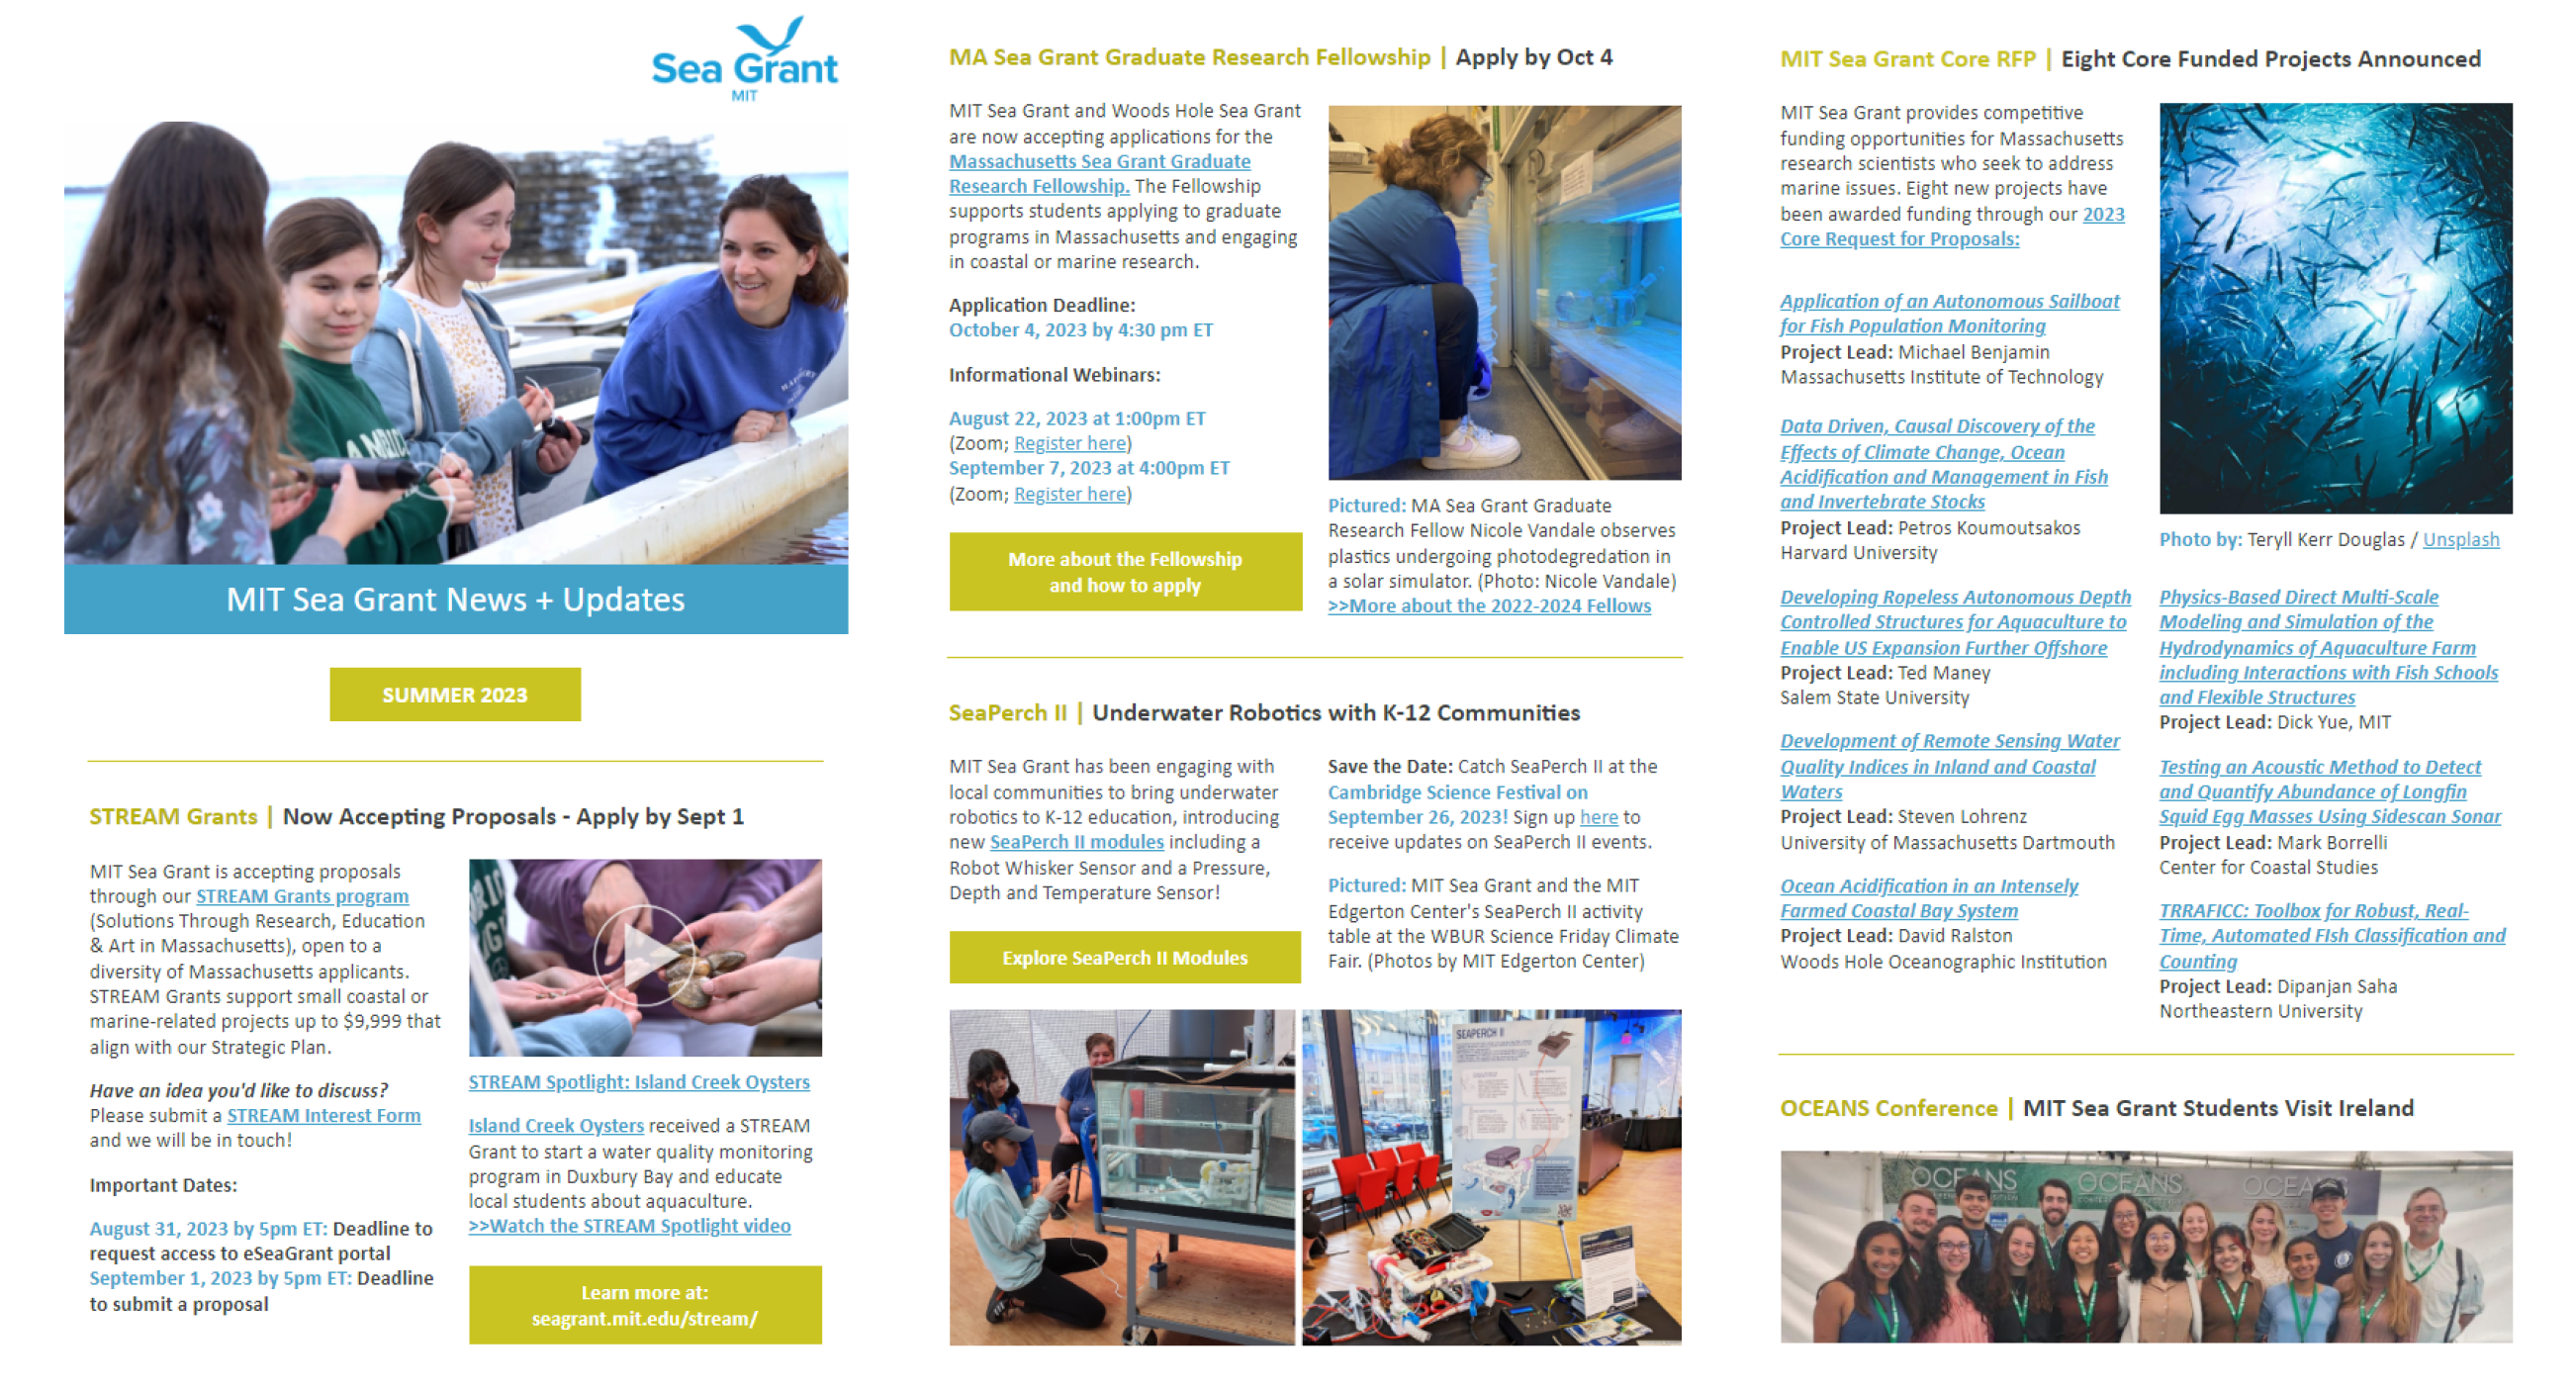 A snapshot of news and updates from MIT Sea Grant's Summer 2023 Newsletter